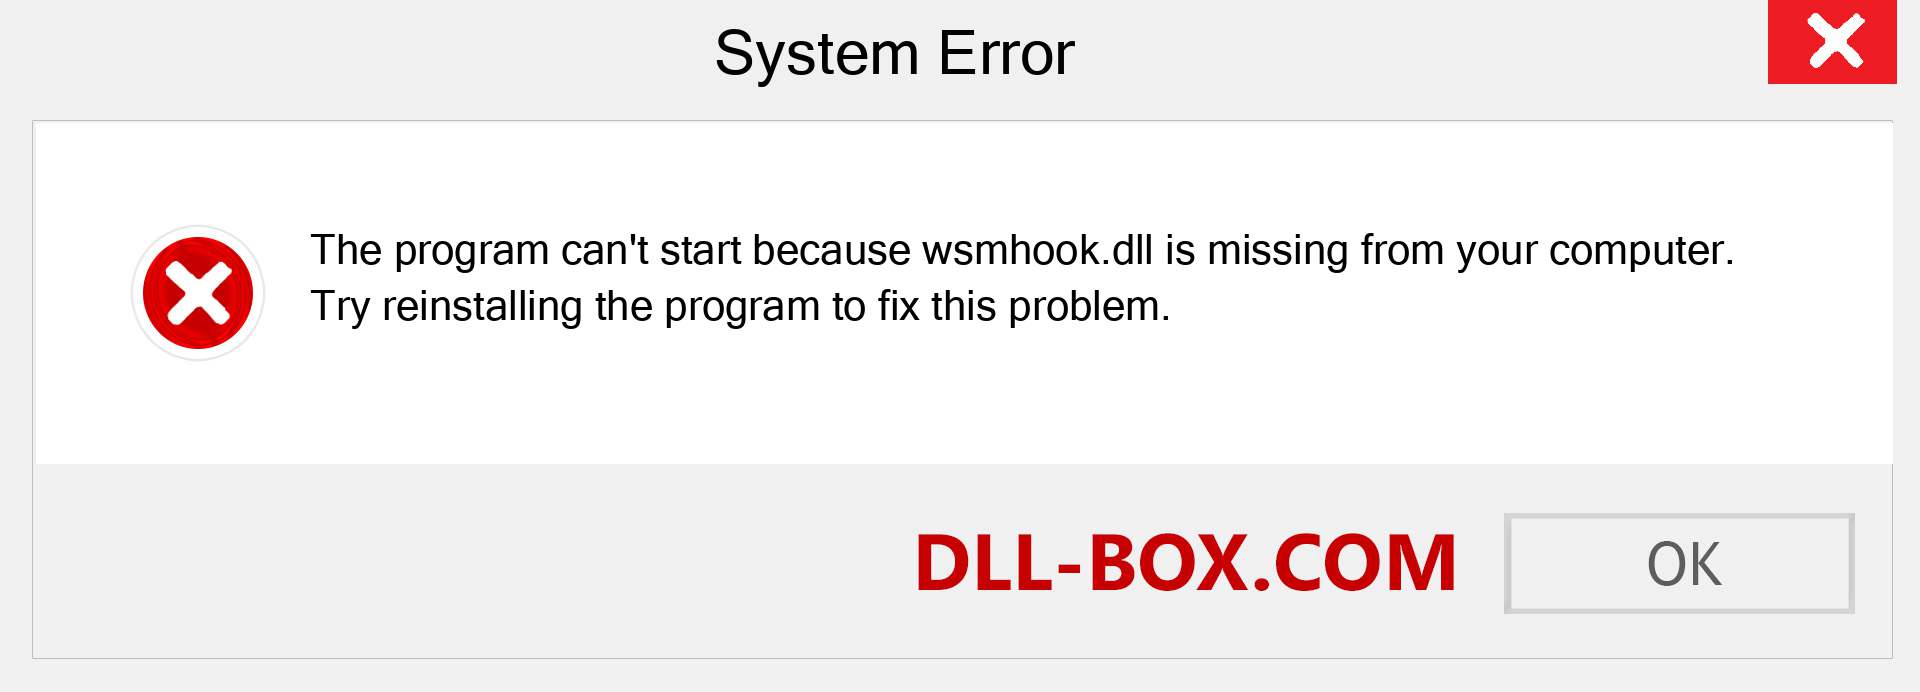  wsmhook.dll file is missing?. Download for Windows 7, 8, 10 - Fix  wsmhook dll Missing Error on Windows, photos, images